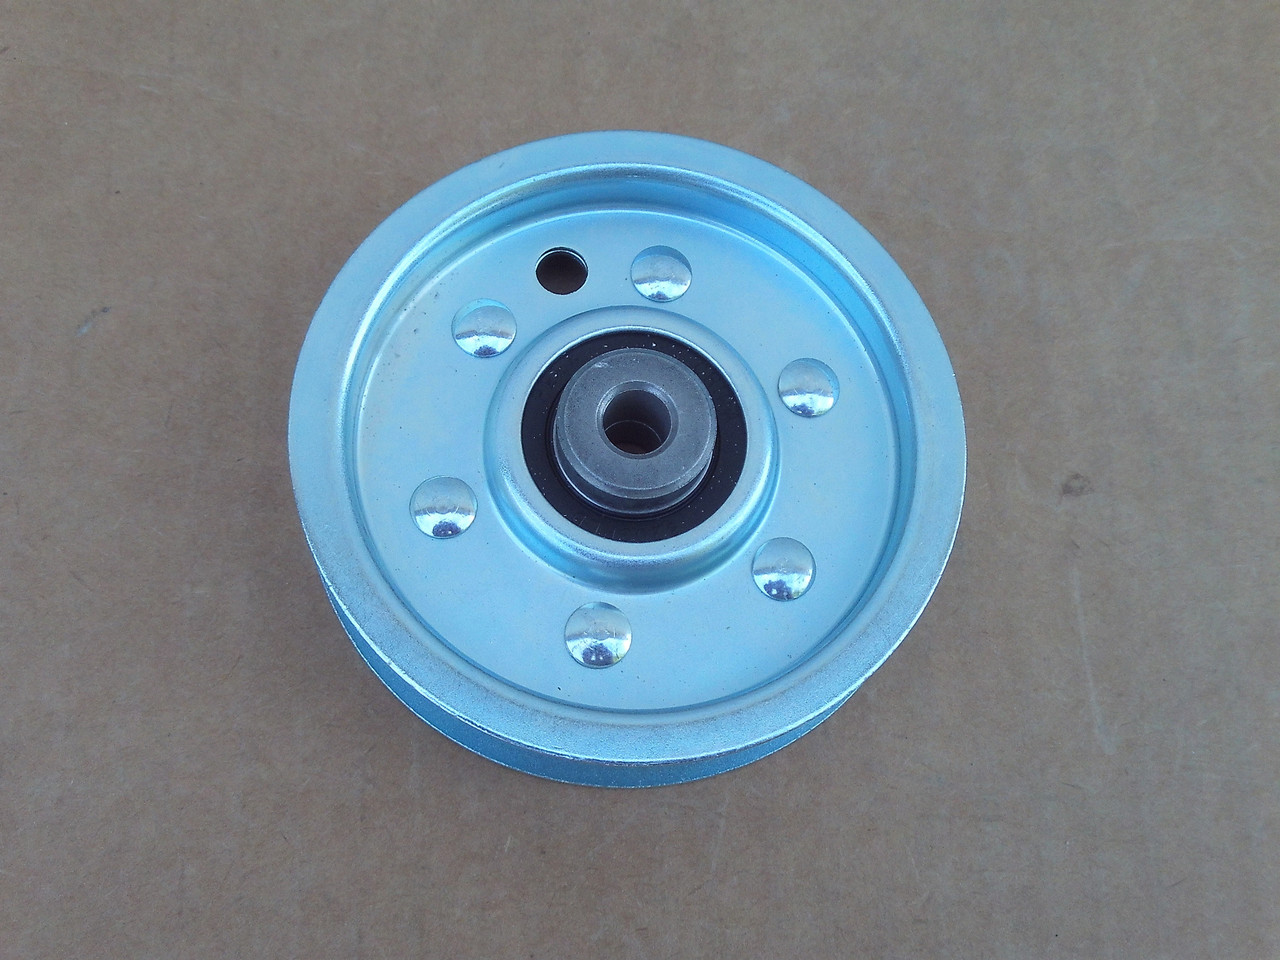 Flat Idler Pulley for Cub Cadet 756-0515, 7560515 Height: 1" ID: 3/8" OD: 3-3/4"